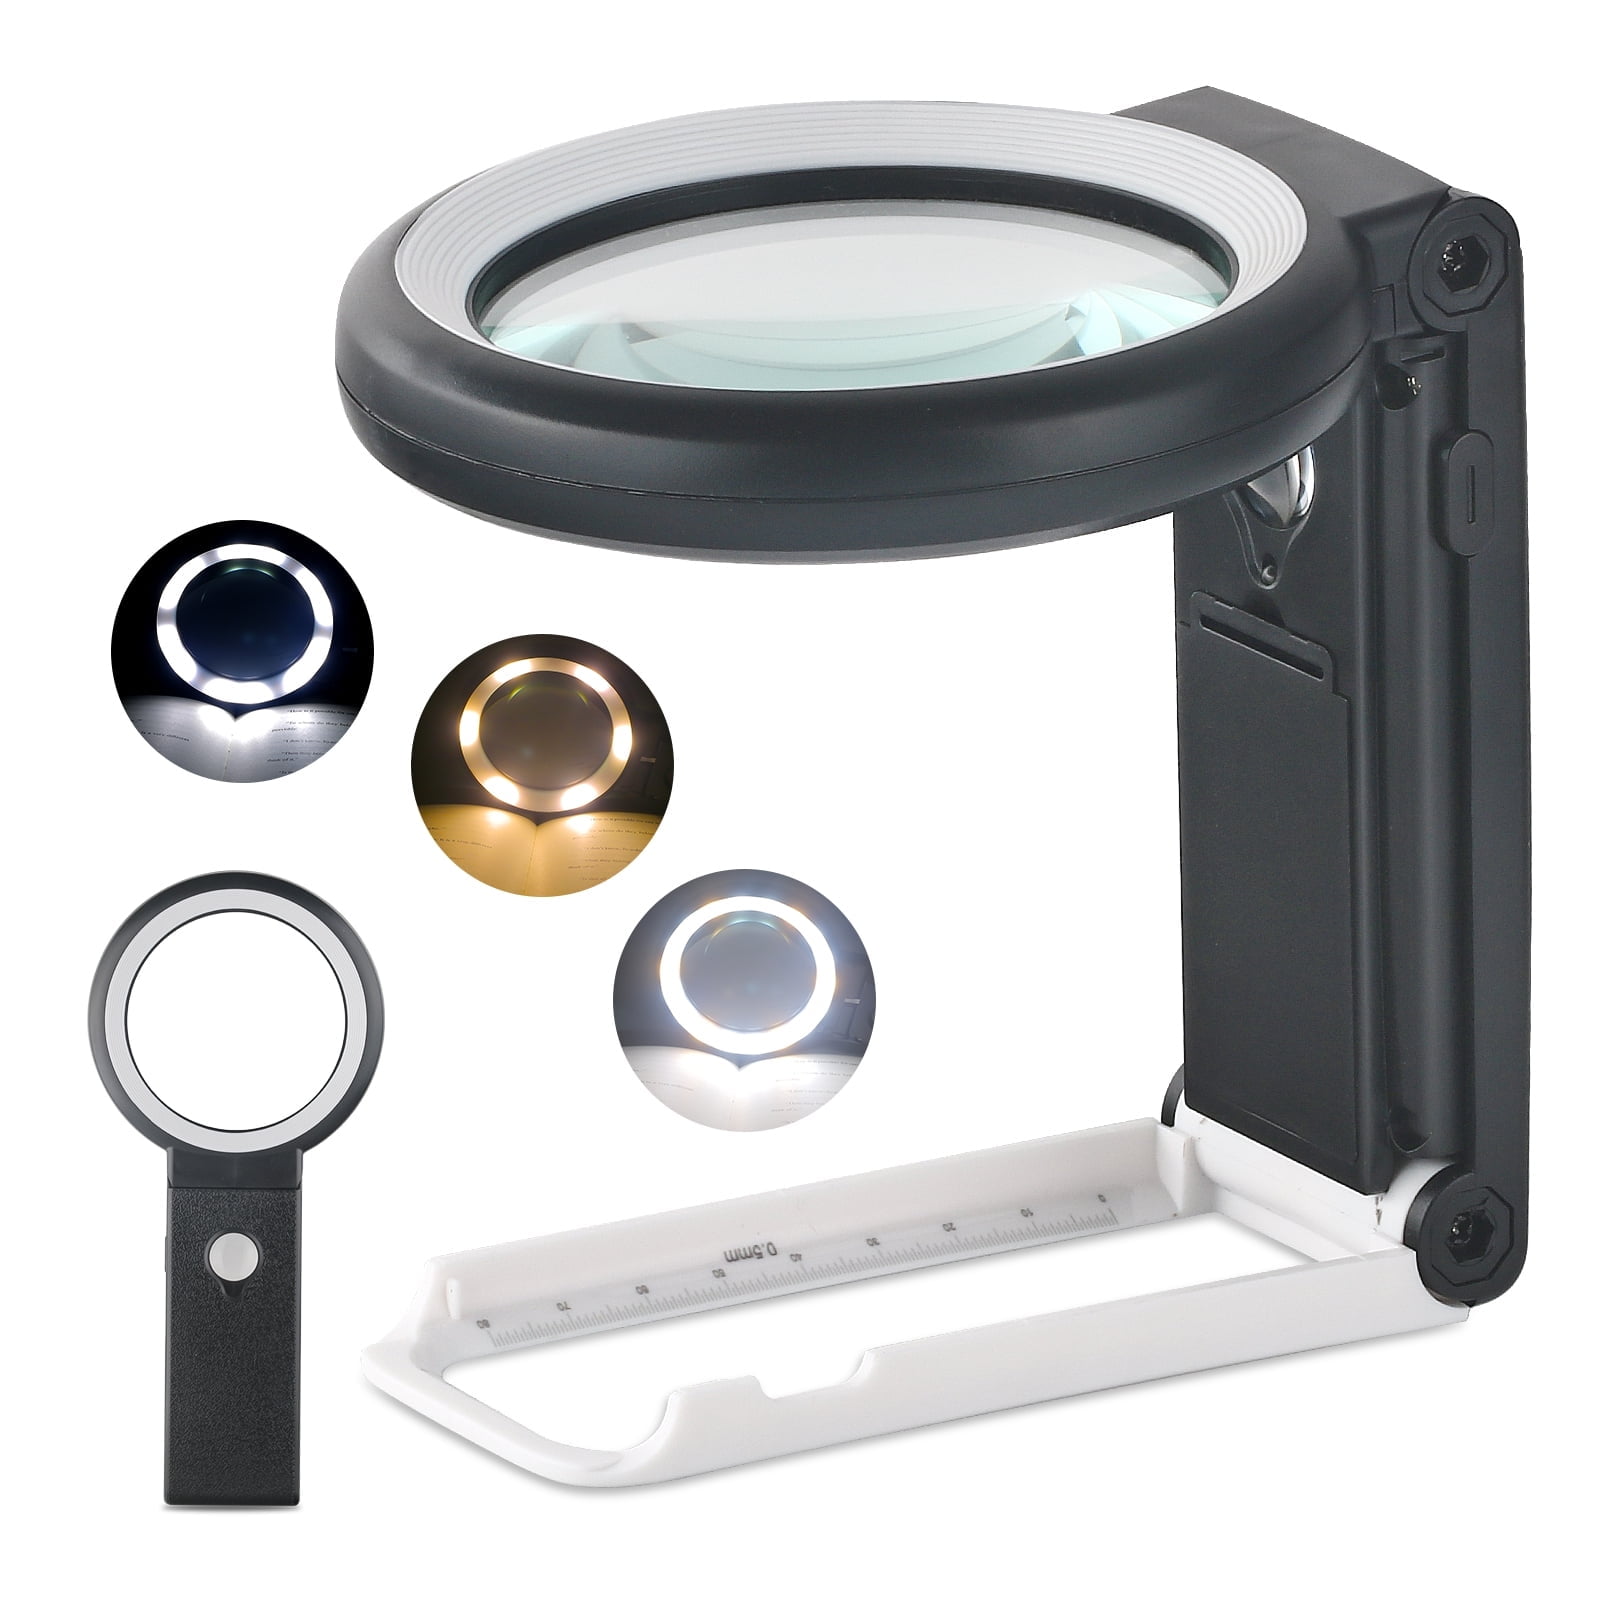  Super Large Magnifying Glass with LED Lights Loupe Magnifier  Illuminated Old Man Reading Coins Handheld Reading Glasses loupes jewelers  loupes 100x for weed travel-cases magnifier- with light wireless :  Everything Else